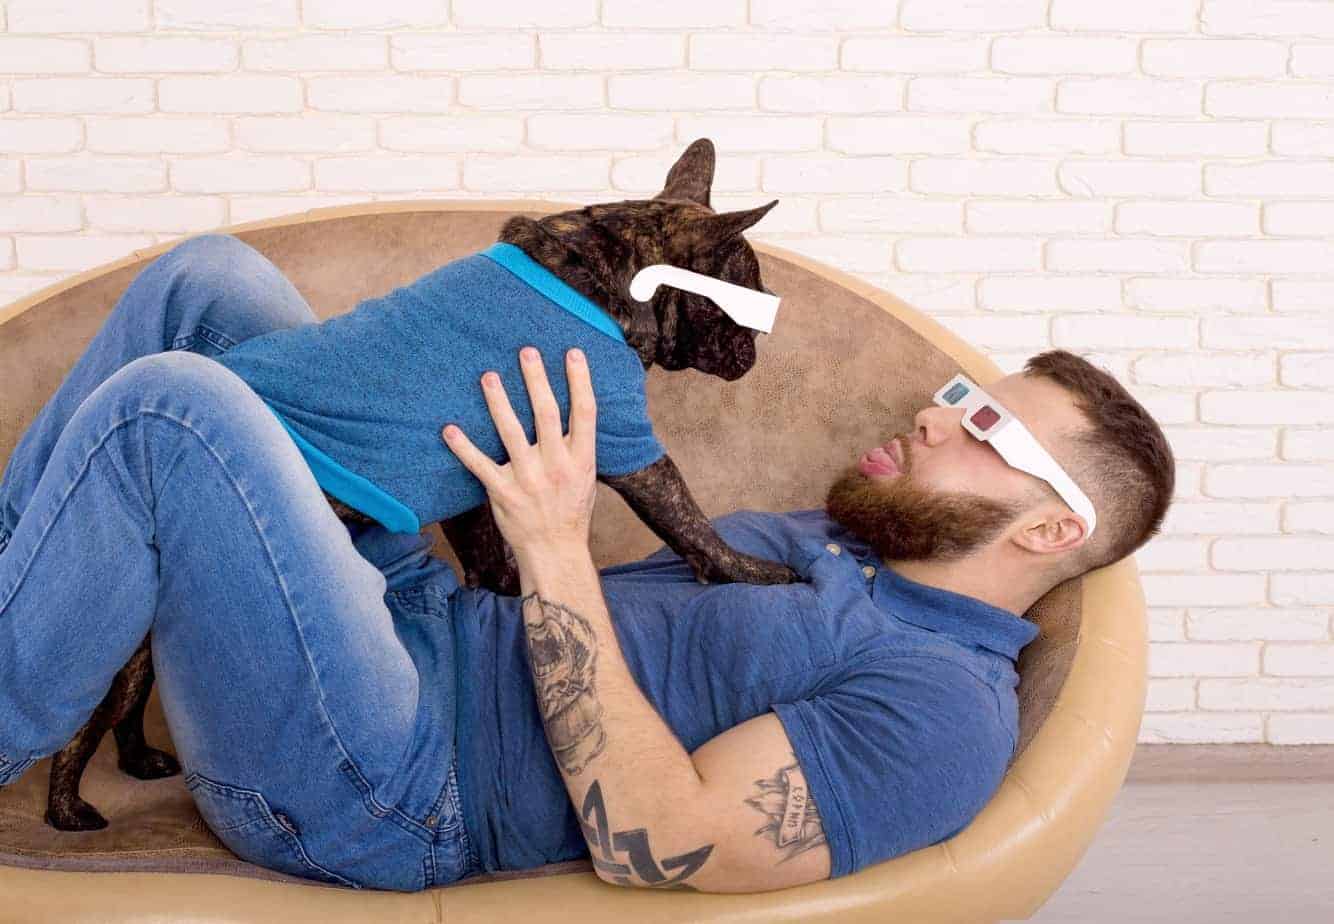 Man plays with French Bulldog. Both are wearing 3-D glasses. Dogs learn to imitate their owners' personality traits and behavior.